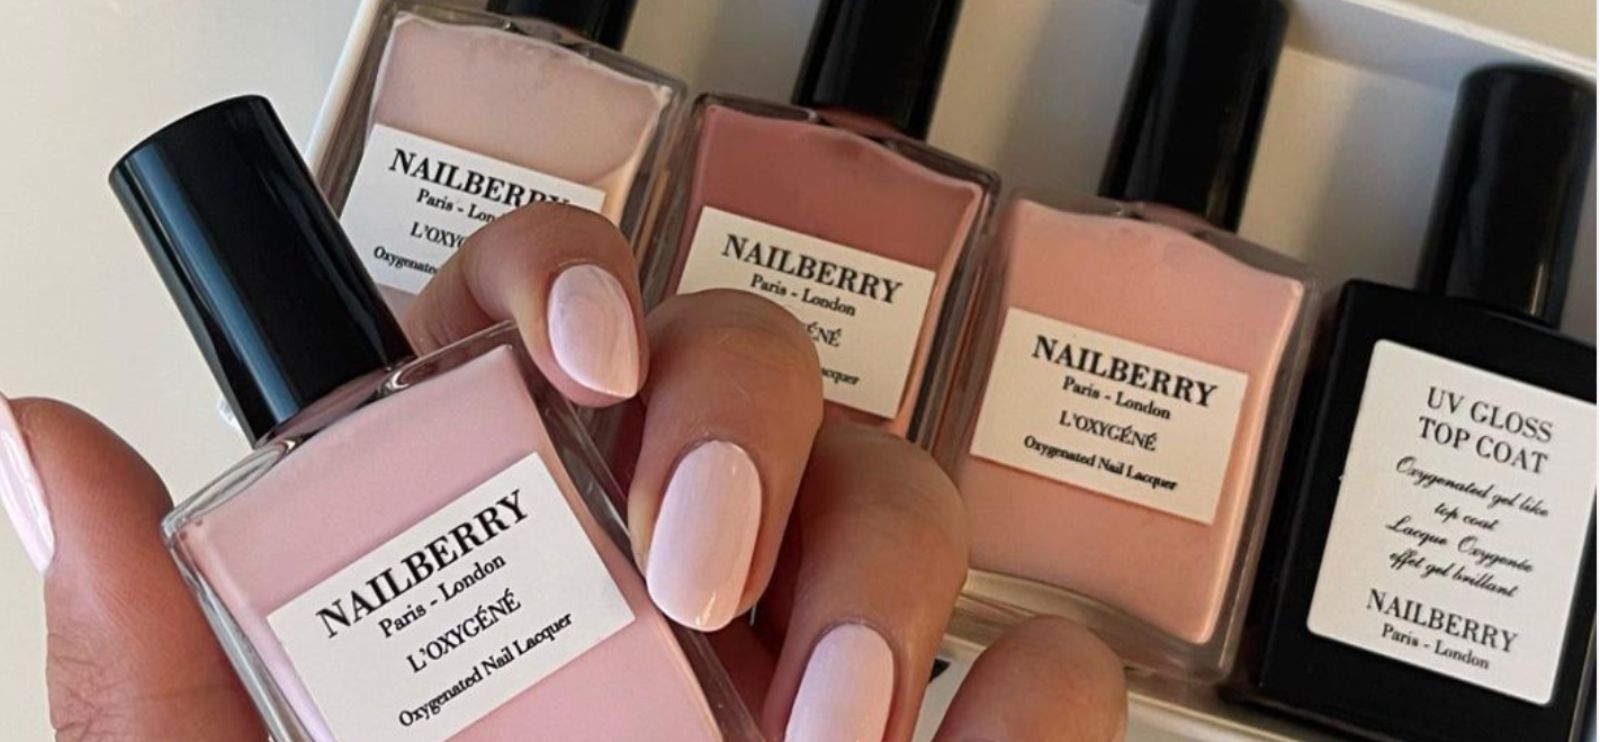 https://we-ar.com/collections/nail-berry